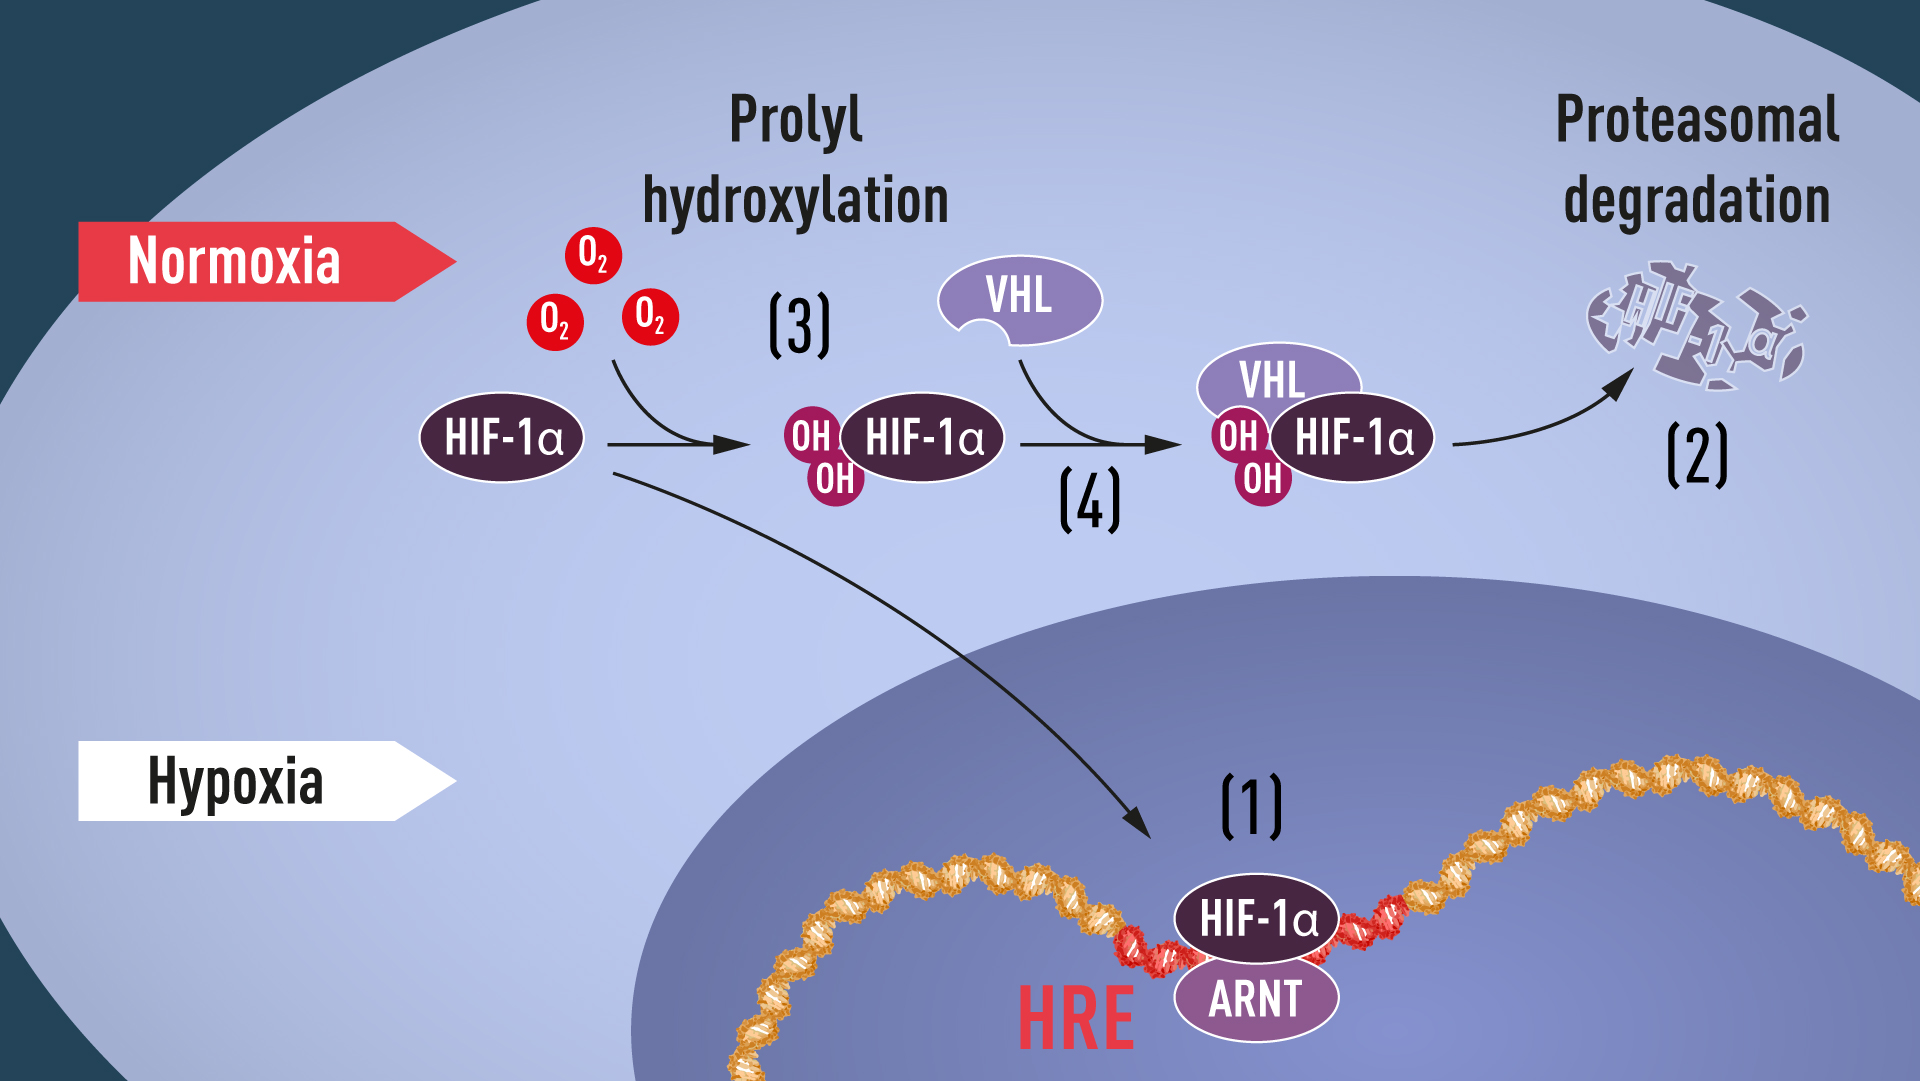 Figure 1. When oxygen levels are low (hypoxia), HIF-1α is protected from degradation and accumulates in the nucleus, where it associates with ARNT and binds to specific DNA sequences (HRE) in hypoxia-regulated genes (1). At normal oxygen levels, HIF-1α is rapidly degraded by the proteasome (2). Oxygen regulates the degradation process by the addition of hydroxyl groups (OH) to HIF-1α (3). The VHL protein can then recognize and form a complex with HIF-1α leading to its degradation in an oxygen-dependent manner (4).